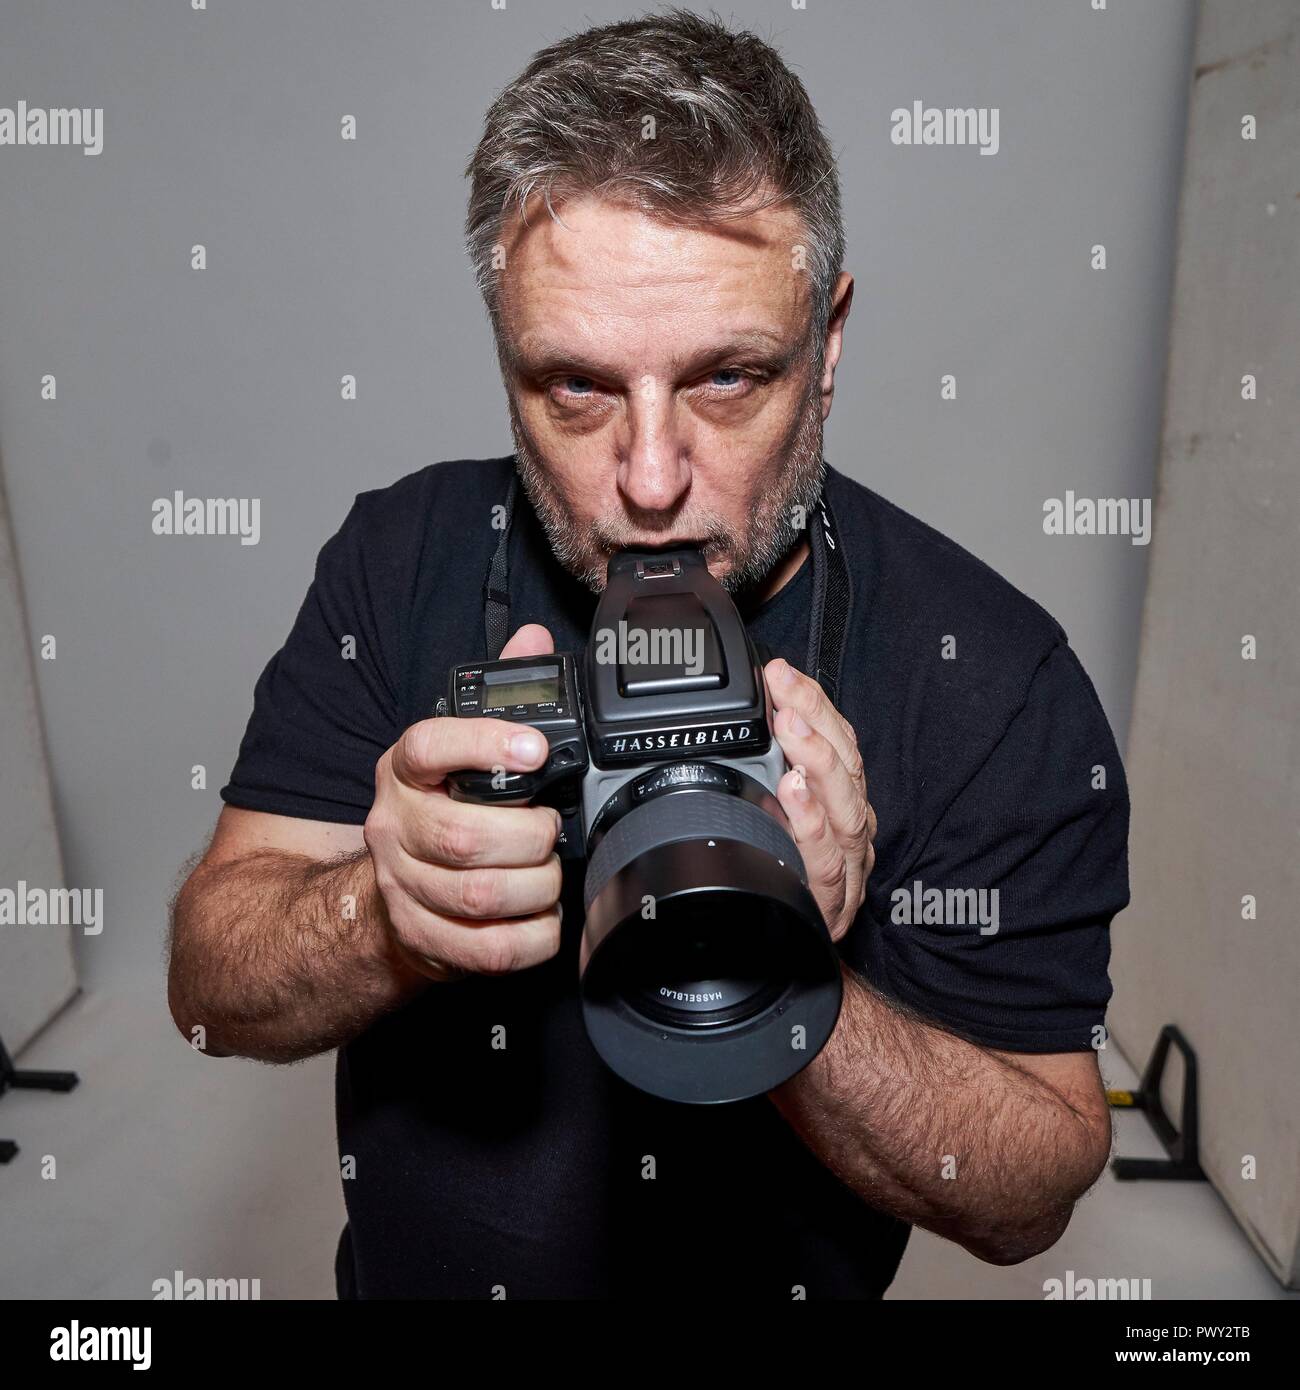 Berlin, Deutschland. 17th Oct, 2018. 17.10.2018, top photographer John  Rankin Waddell 'Rankin' was booked at the BOMBAY SAPPHIRE Canvas Bar in  Berlin. Exclusive portrait of photographer with his Hasselblad camera in  front